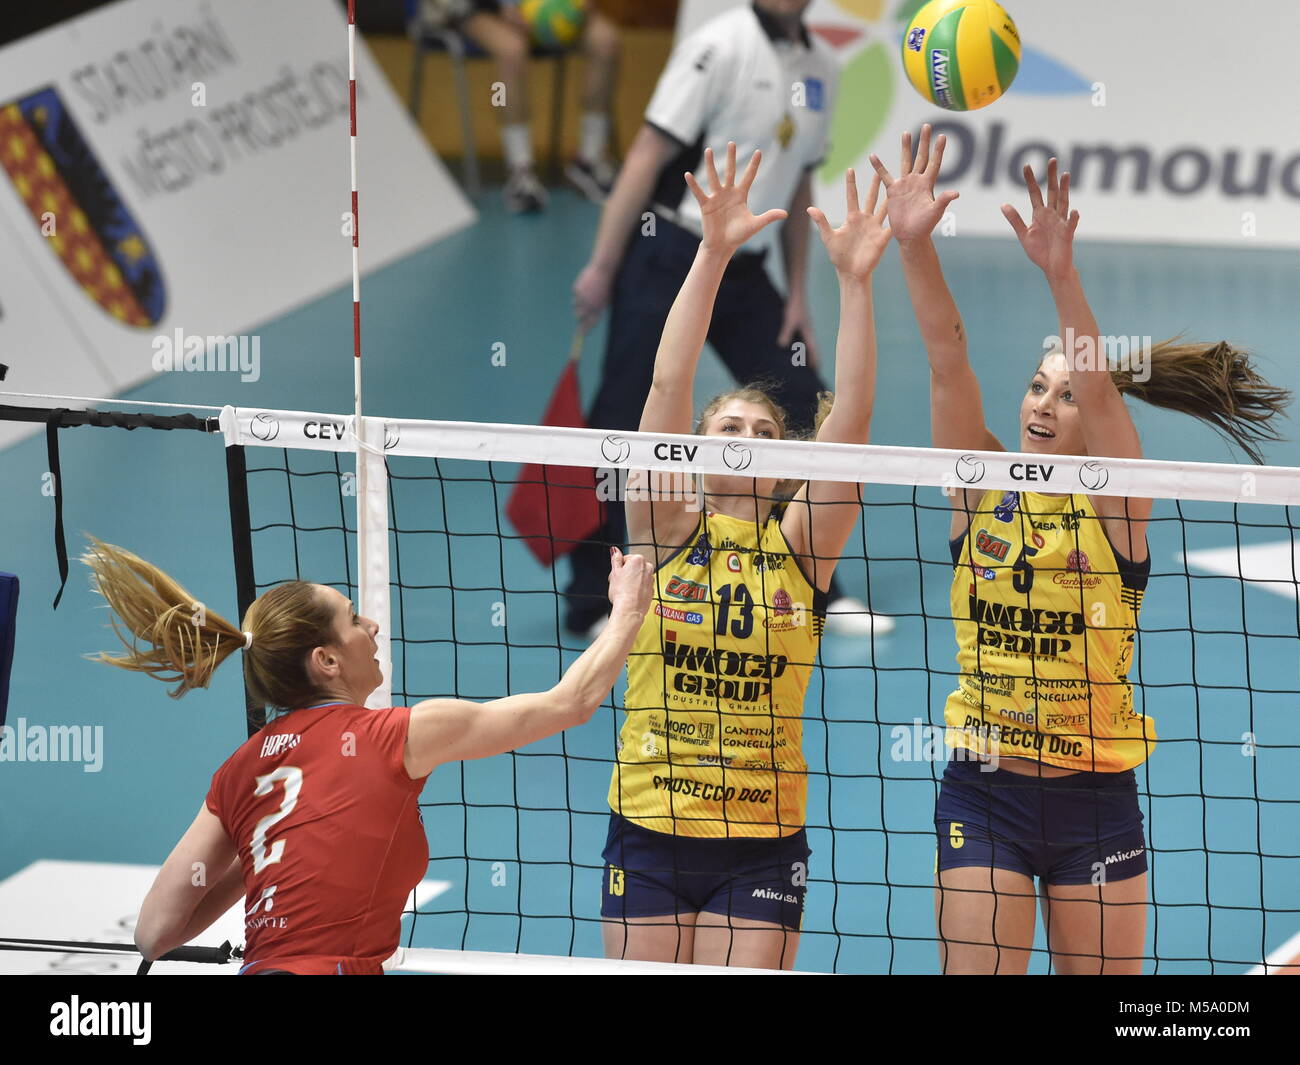 Prostejov, Czech Republic. 21st Feb, 2018. L-R Helena Horka (Prostejov), Samanta Fabris and Robin de Kruijf (both Imoco) in action during the VK Agel Prostejov (Czech Republic) vs Imoco Volley Conegliano (Italy) volleyball match of the Women's Volleyball Champions League in Prostejov, Czech Republic, on February 21, 2018. Credit: Ludek Perina/CTK Photo/Alamy Live News Stock Photo